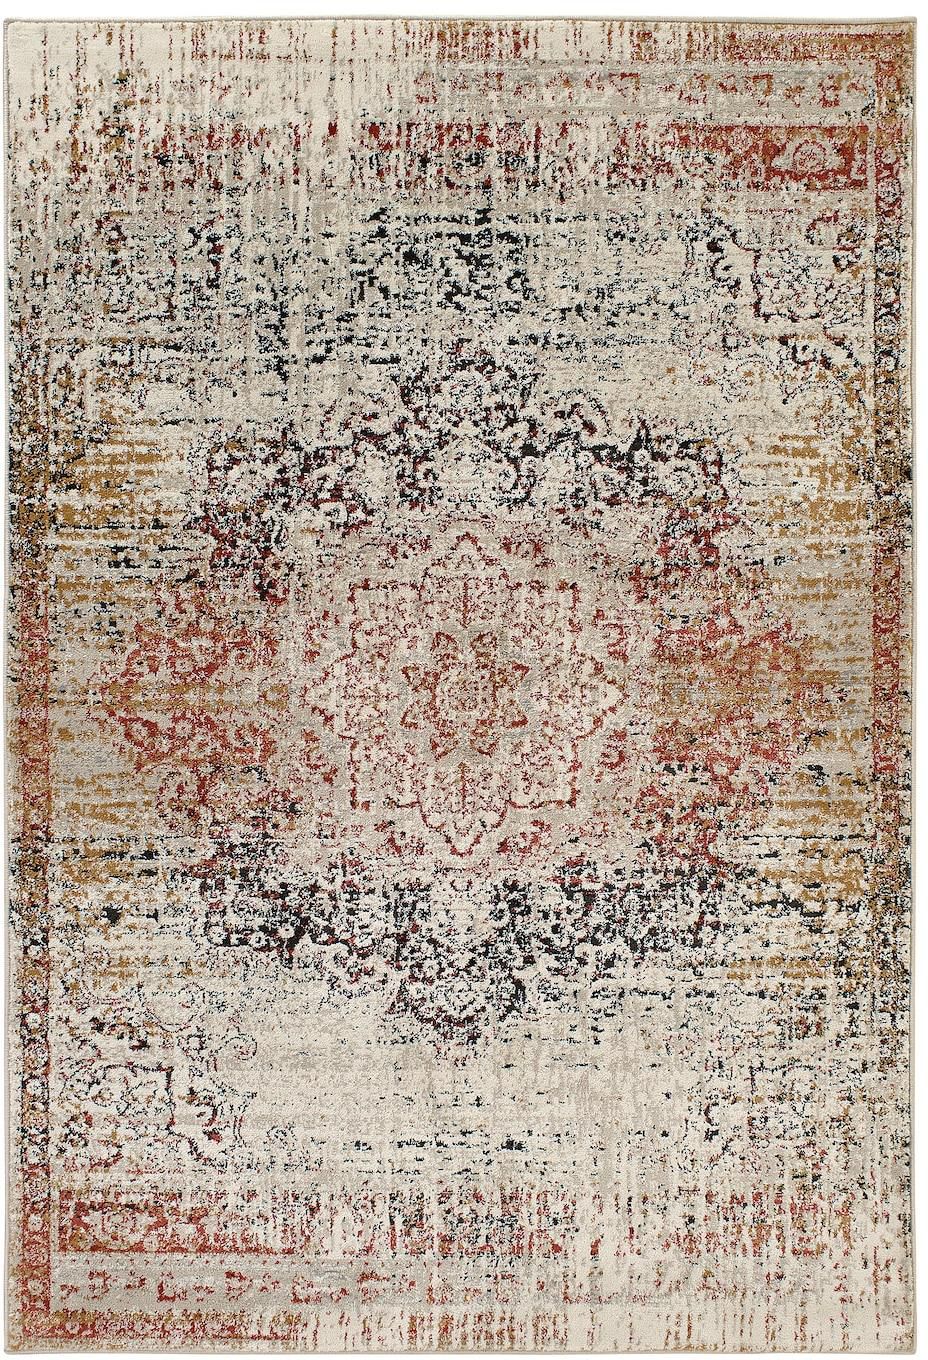 JEJSING Rug, low pile - red/grey-brown stained 160x235 cm